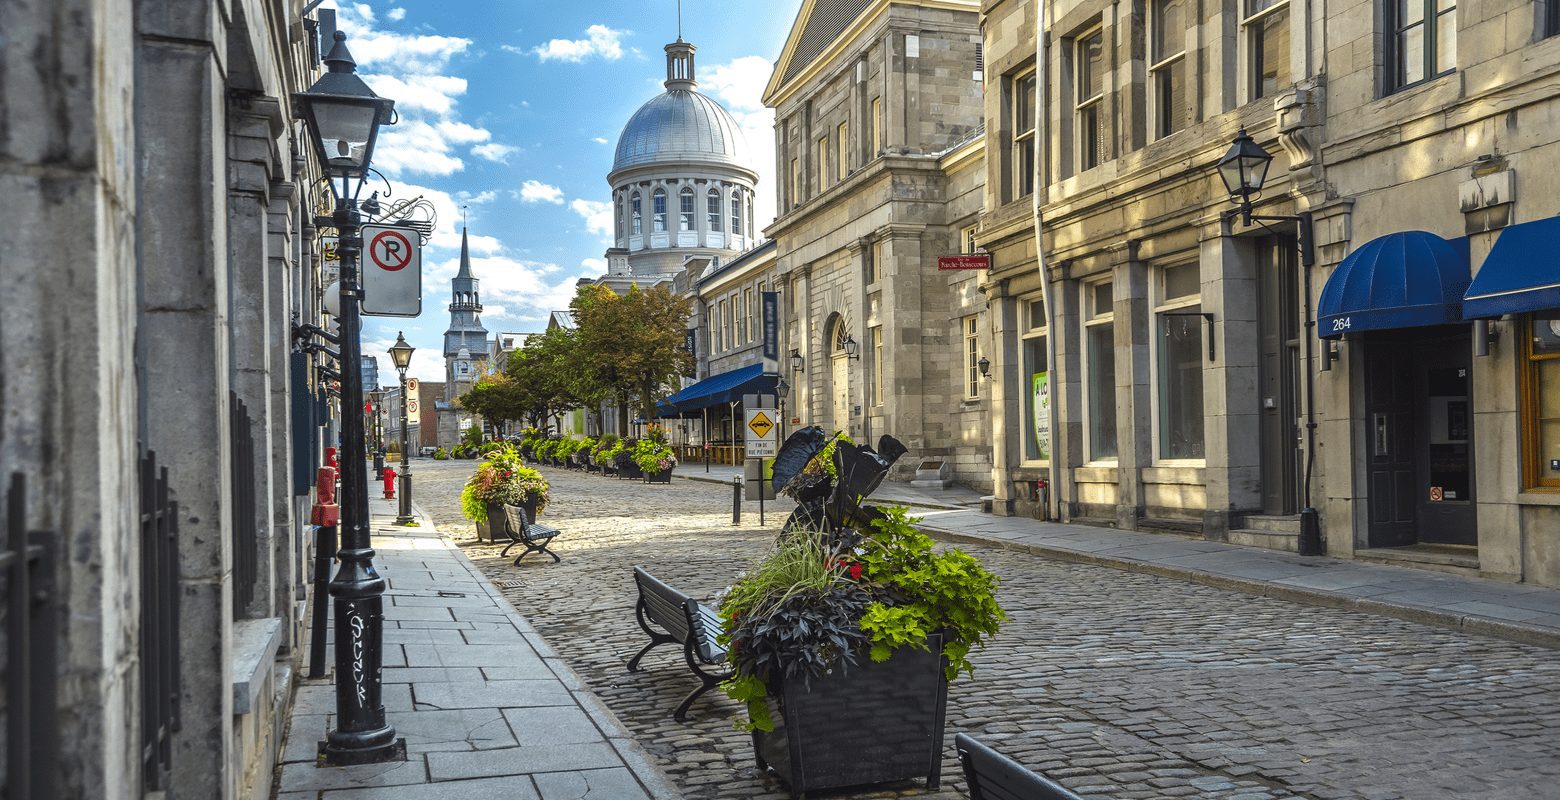 As an image for a piece on when to visit Montreal, a street in the old part of the city on a cool summer morning